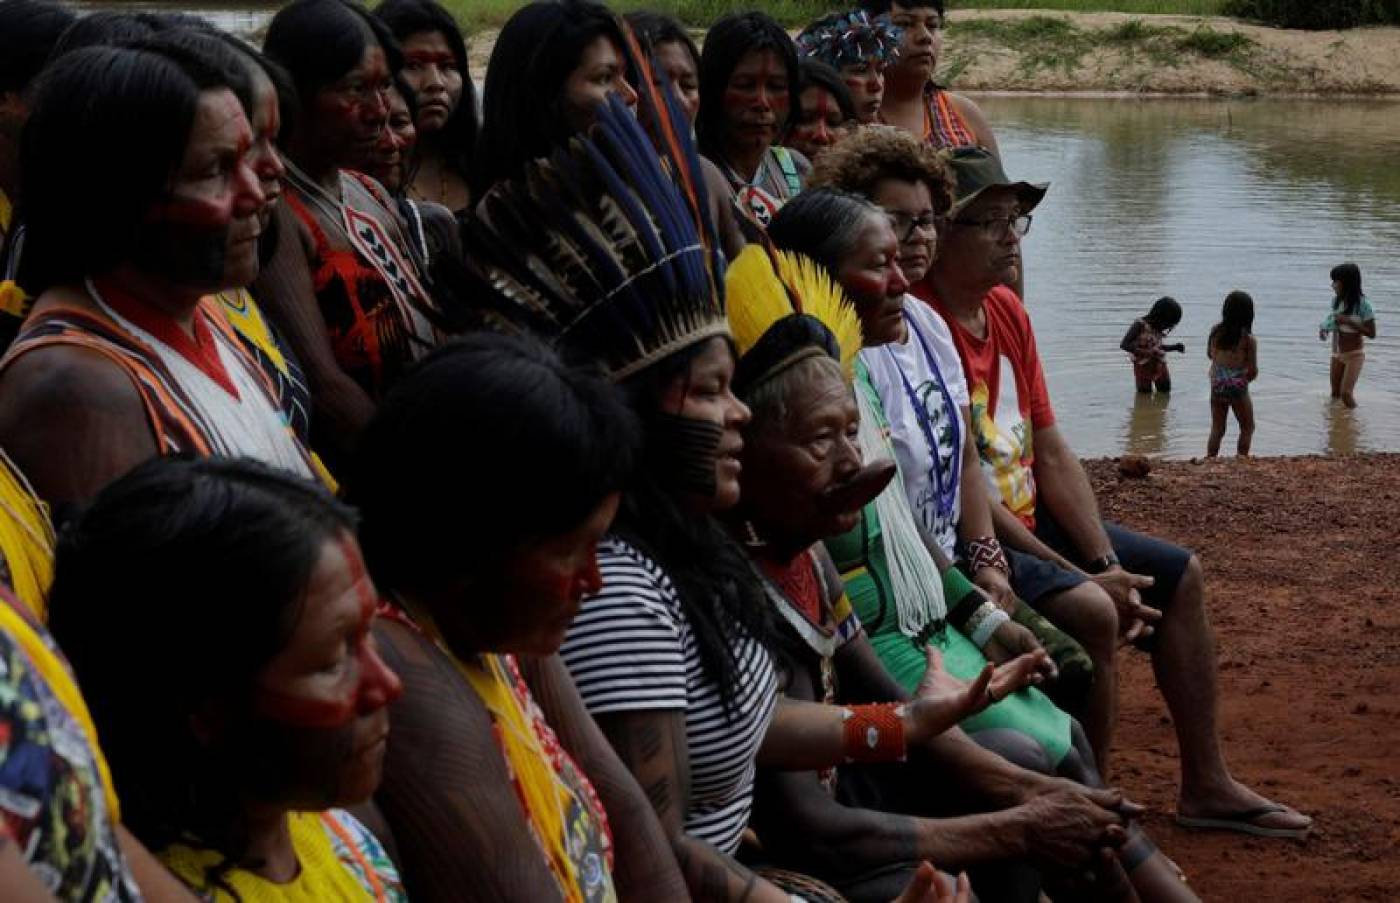 Indigenous leader from threatened tribe killed in Brazil